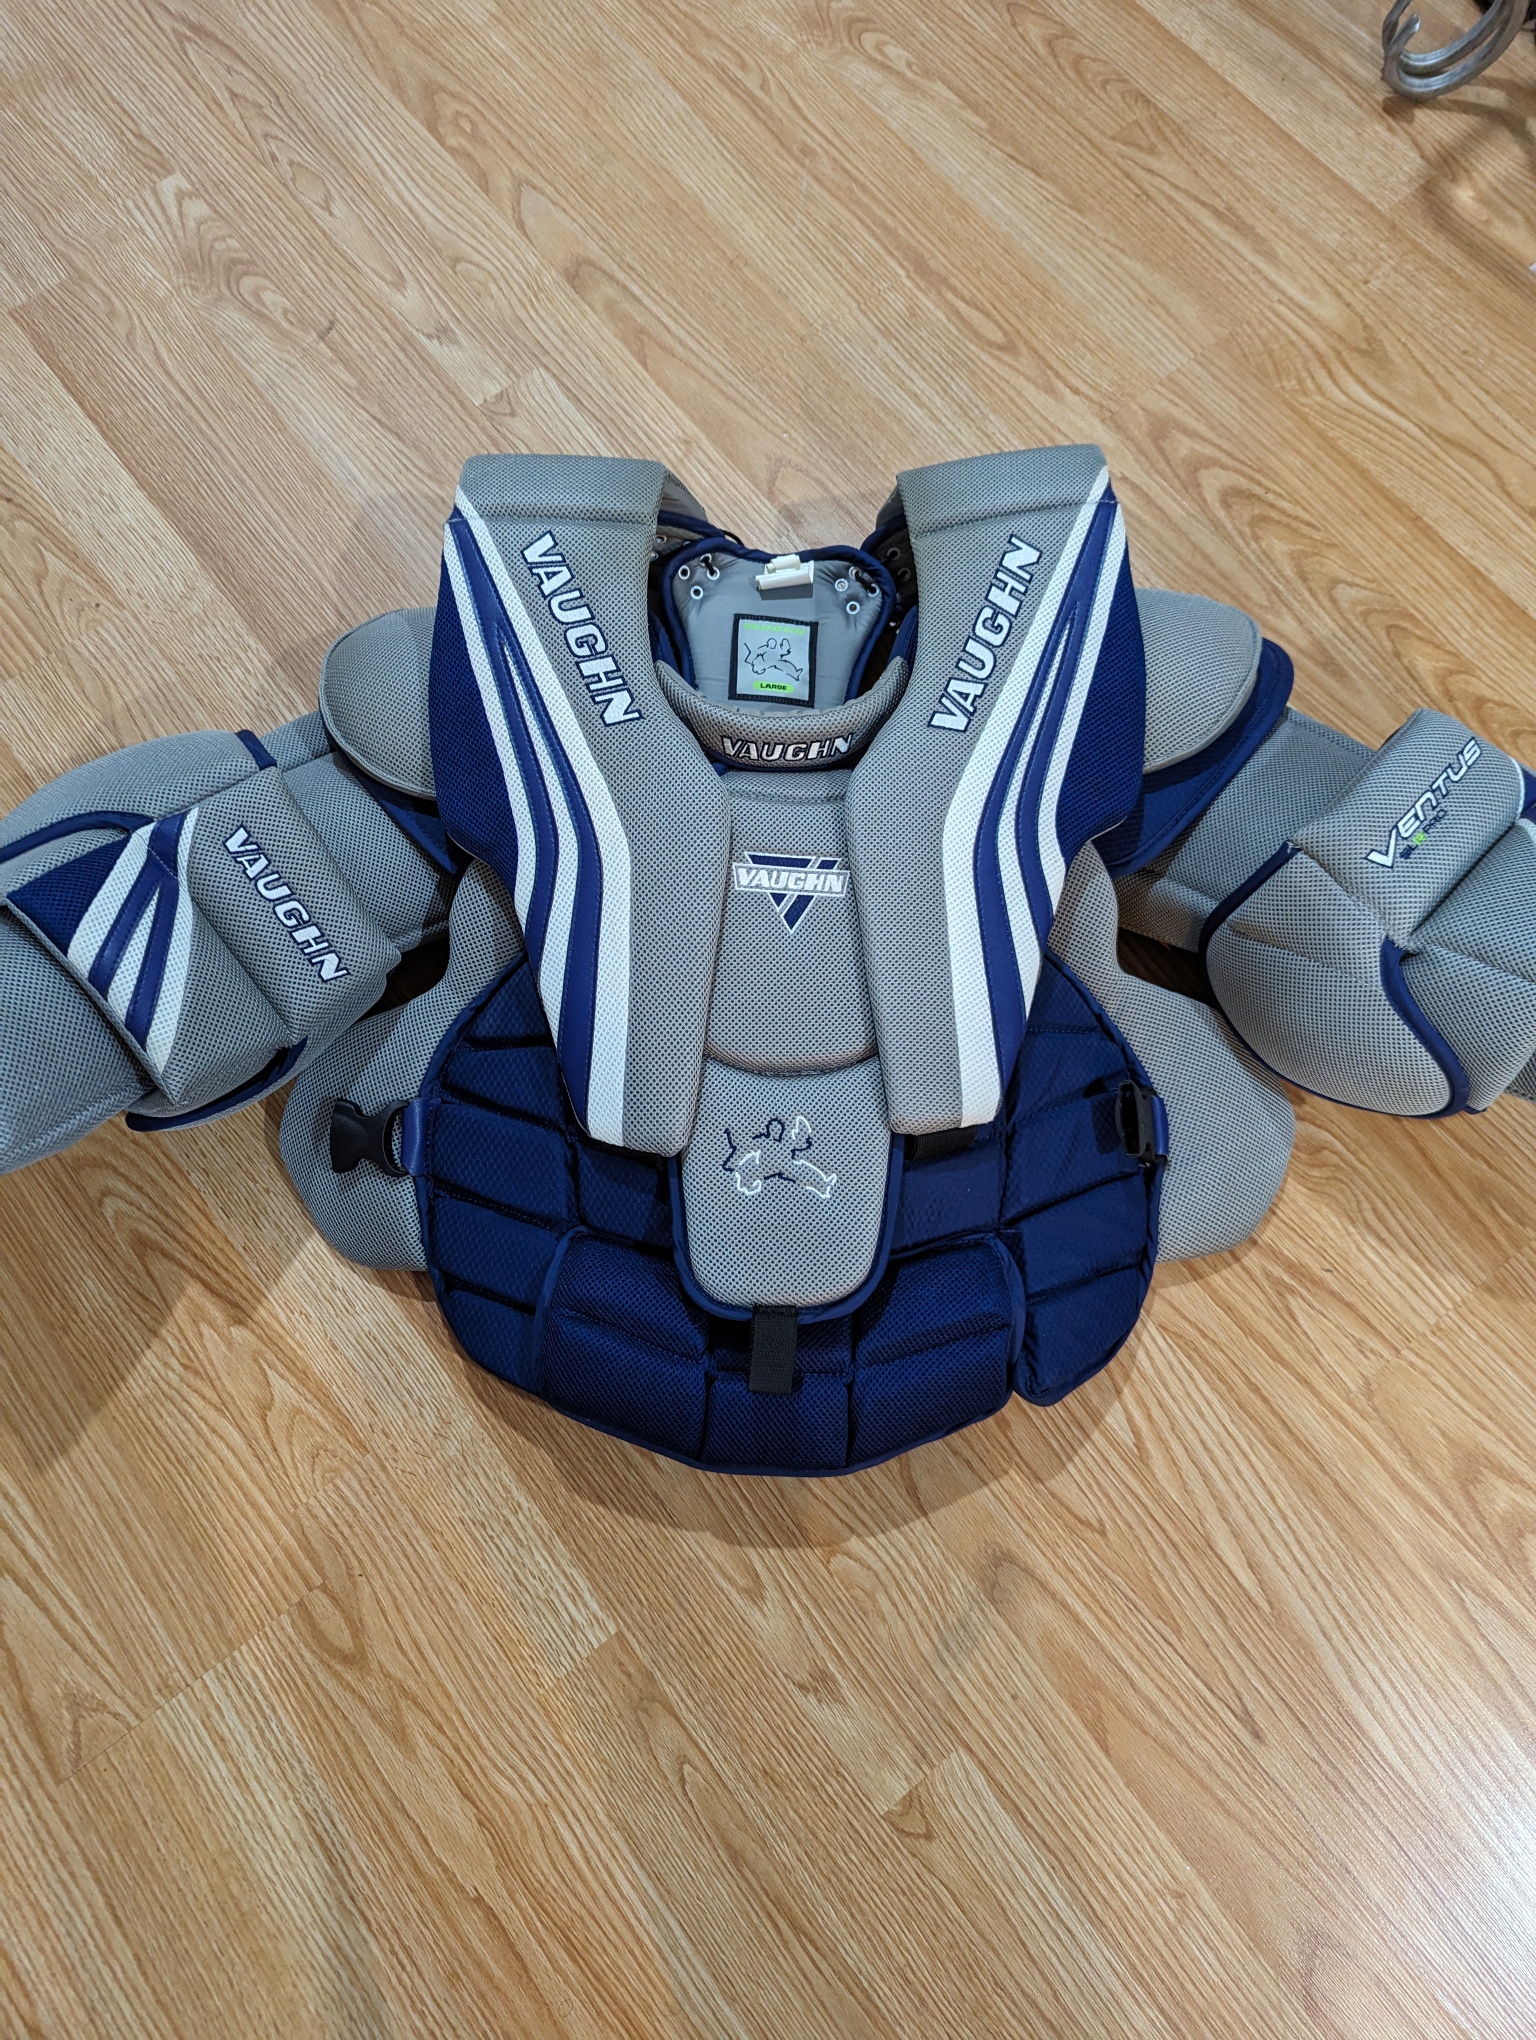 Used Large Vaughn Ventus SLR Pro Goalie Chest Protector